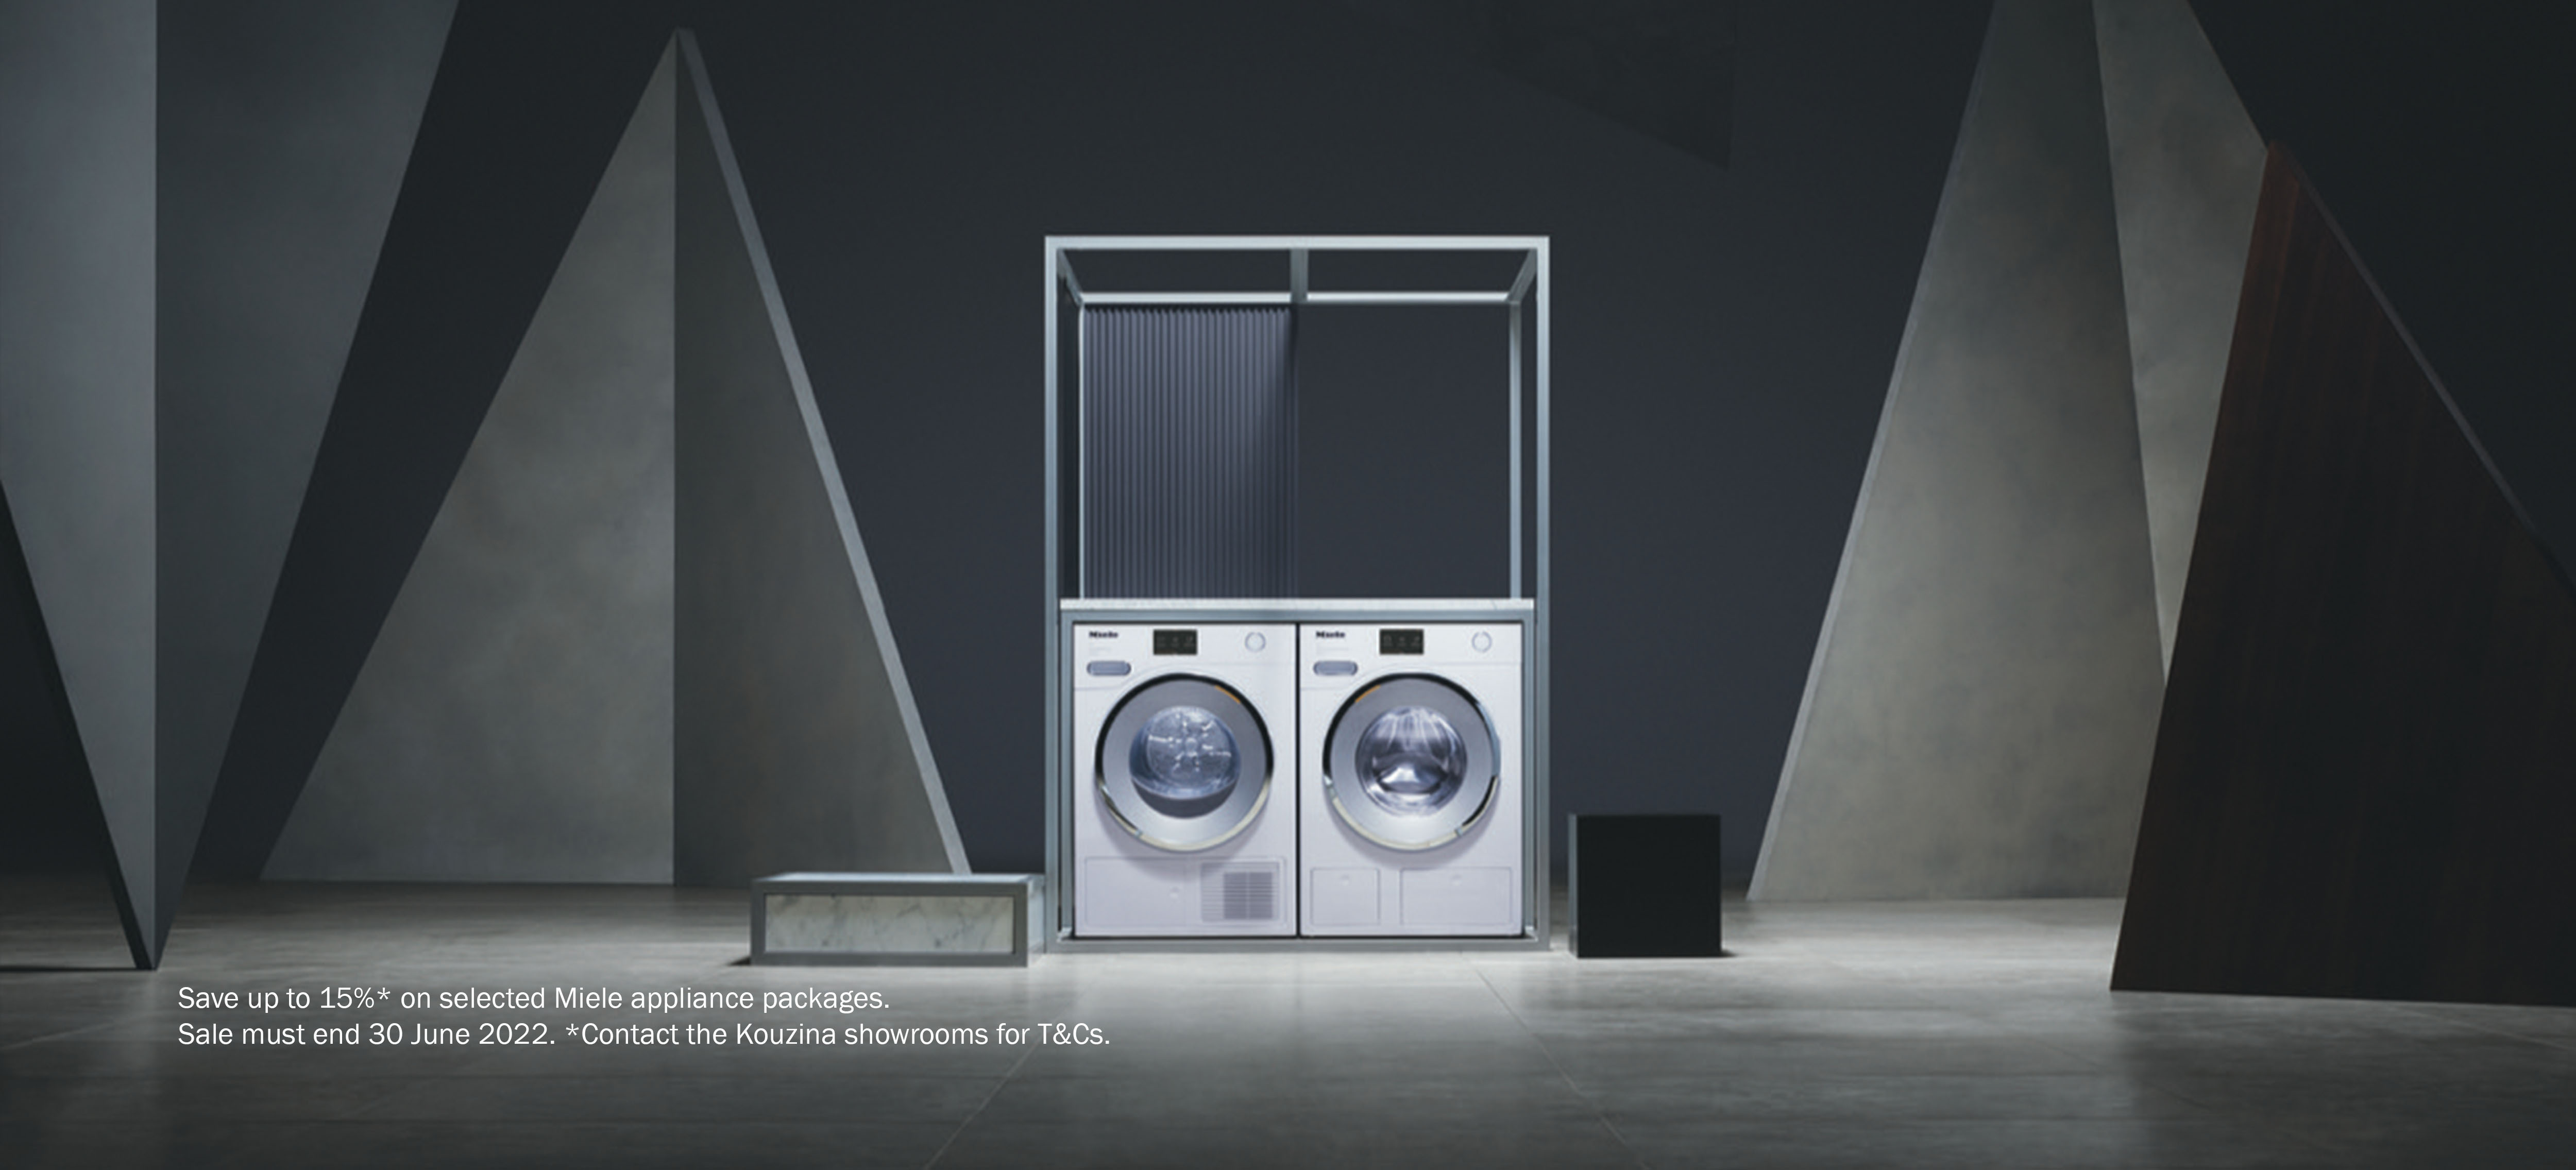 Miele laundry May Sale 2